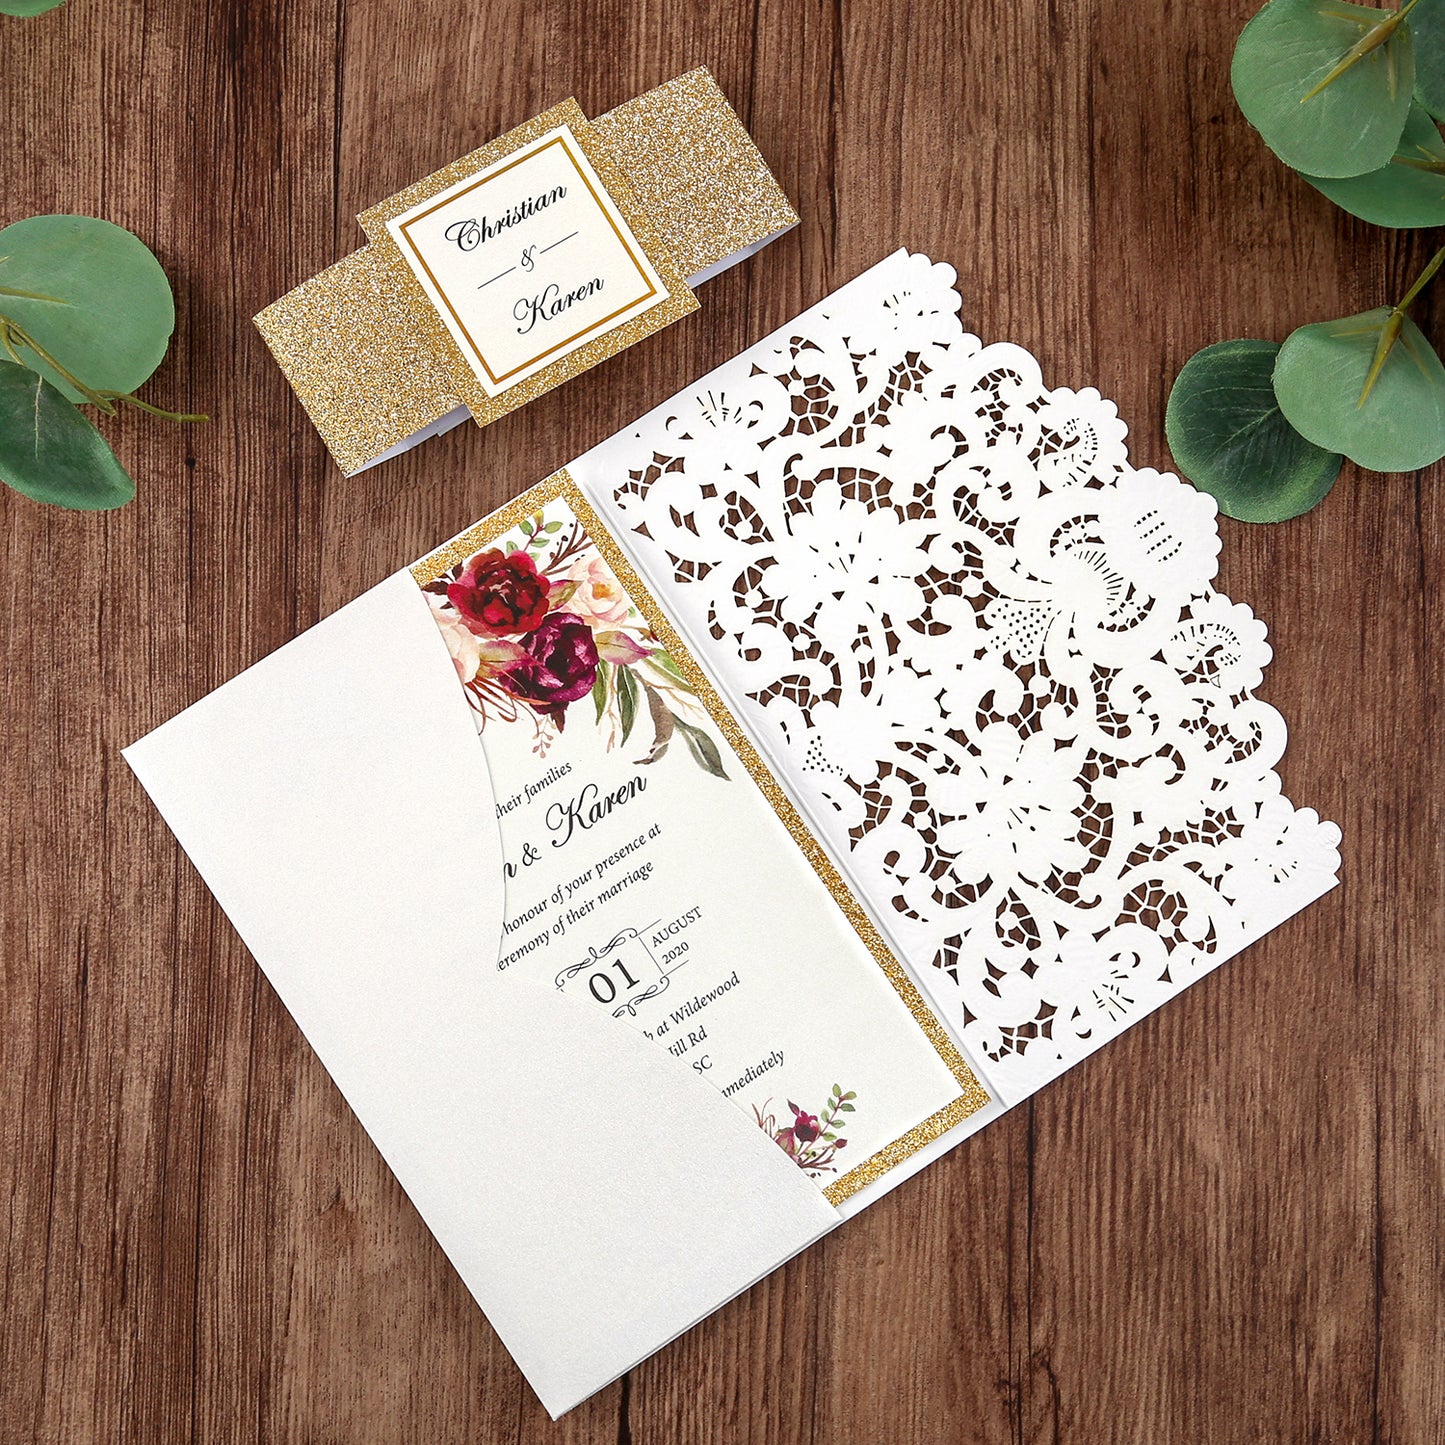 White Hollow Flora Laser Cut Invitations with Gold Glitter Border and Glitter Belly Band for wedding,bridal shower